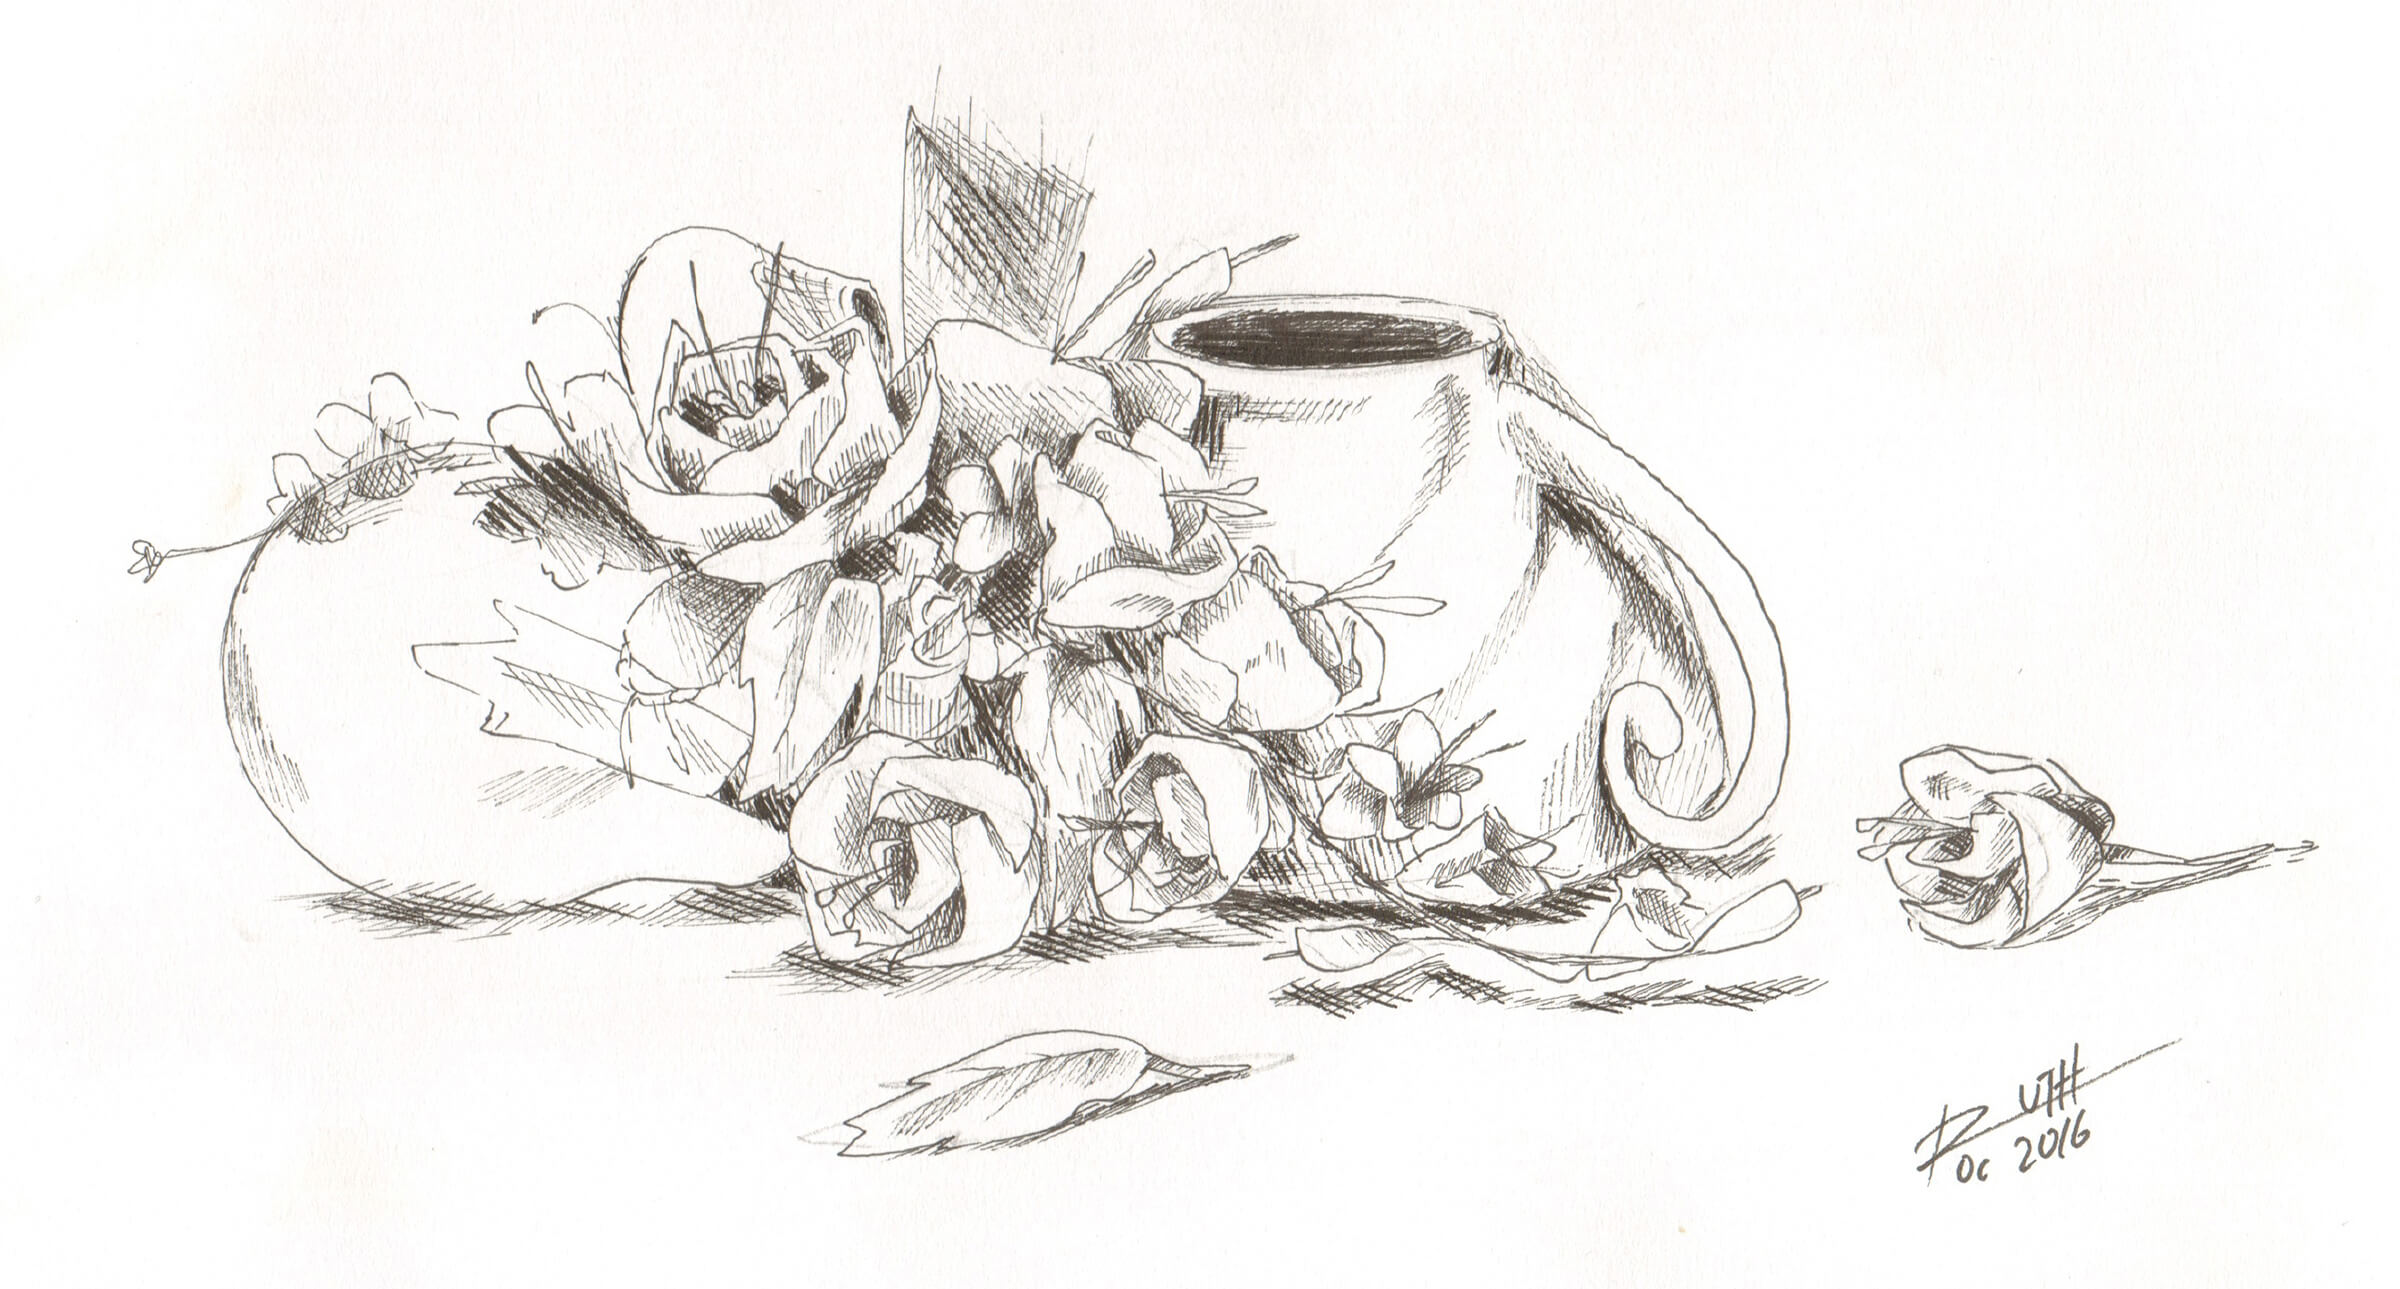 Still-life, black-and-white sketch of an overturned cup, light bulb, and flowers.